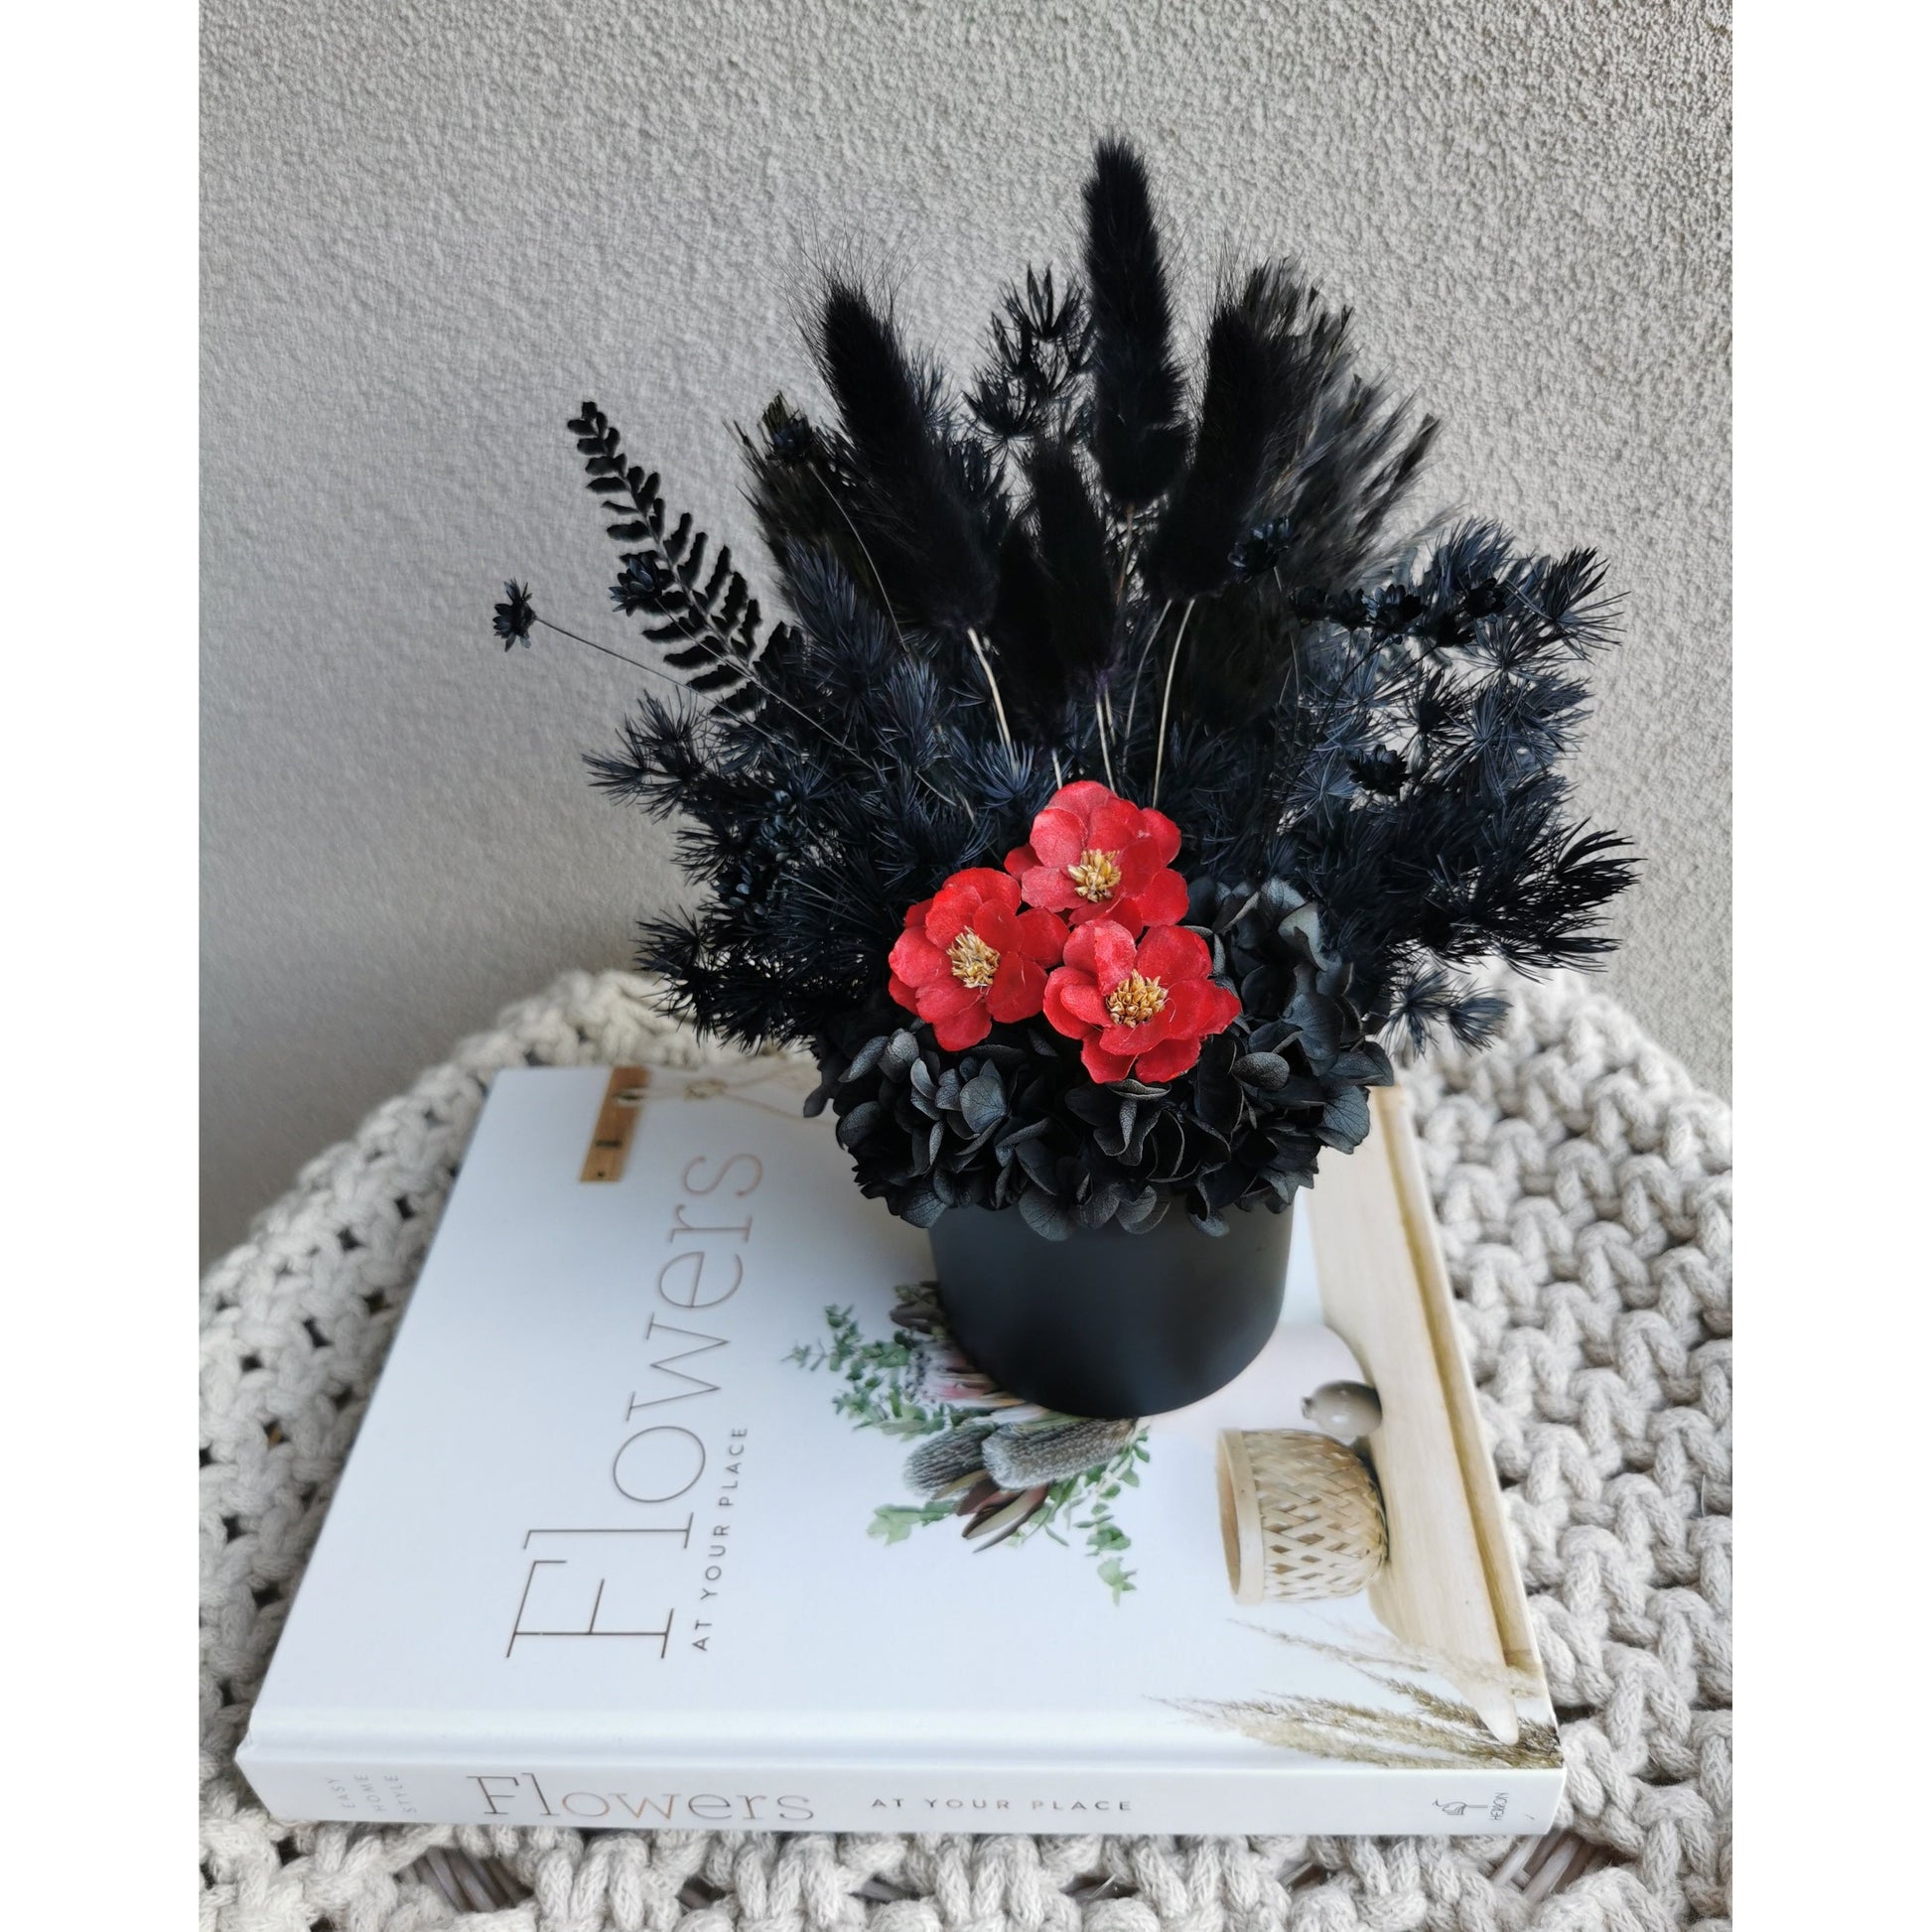 All blacked dried & preserved flowers set in to a mini black pot & featuring 3 mini red flowers in the centre. Photo shows flower arrangement sitting on a book against a blank wall looking down from birds eye view